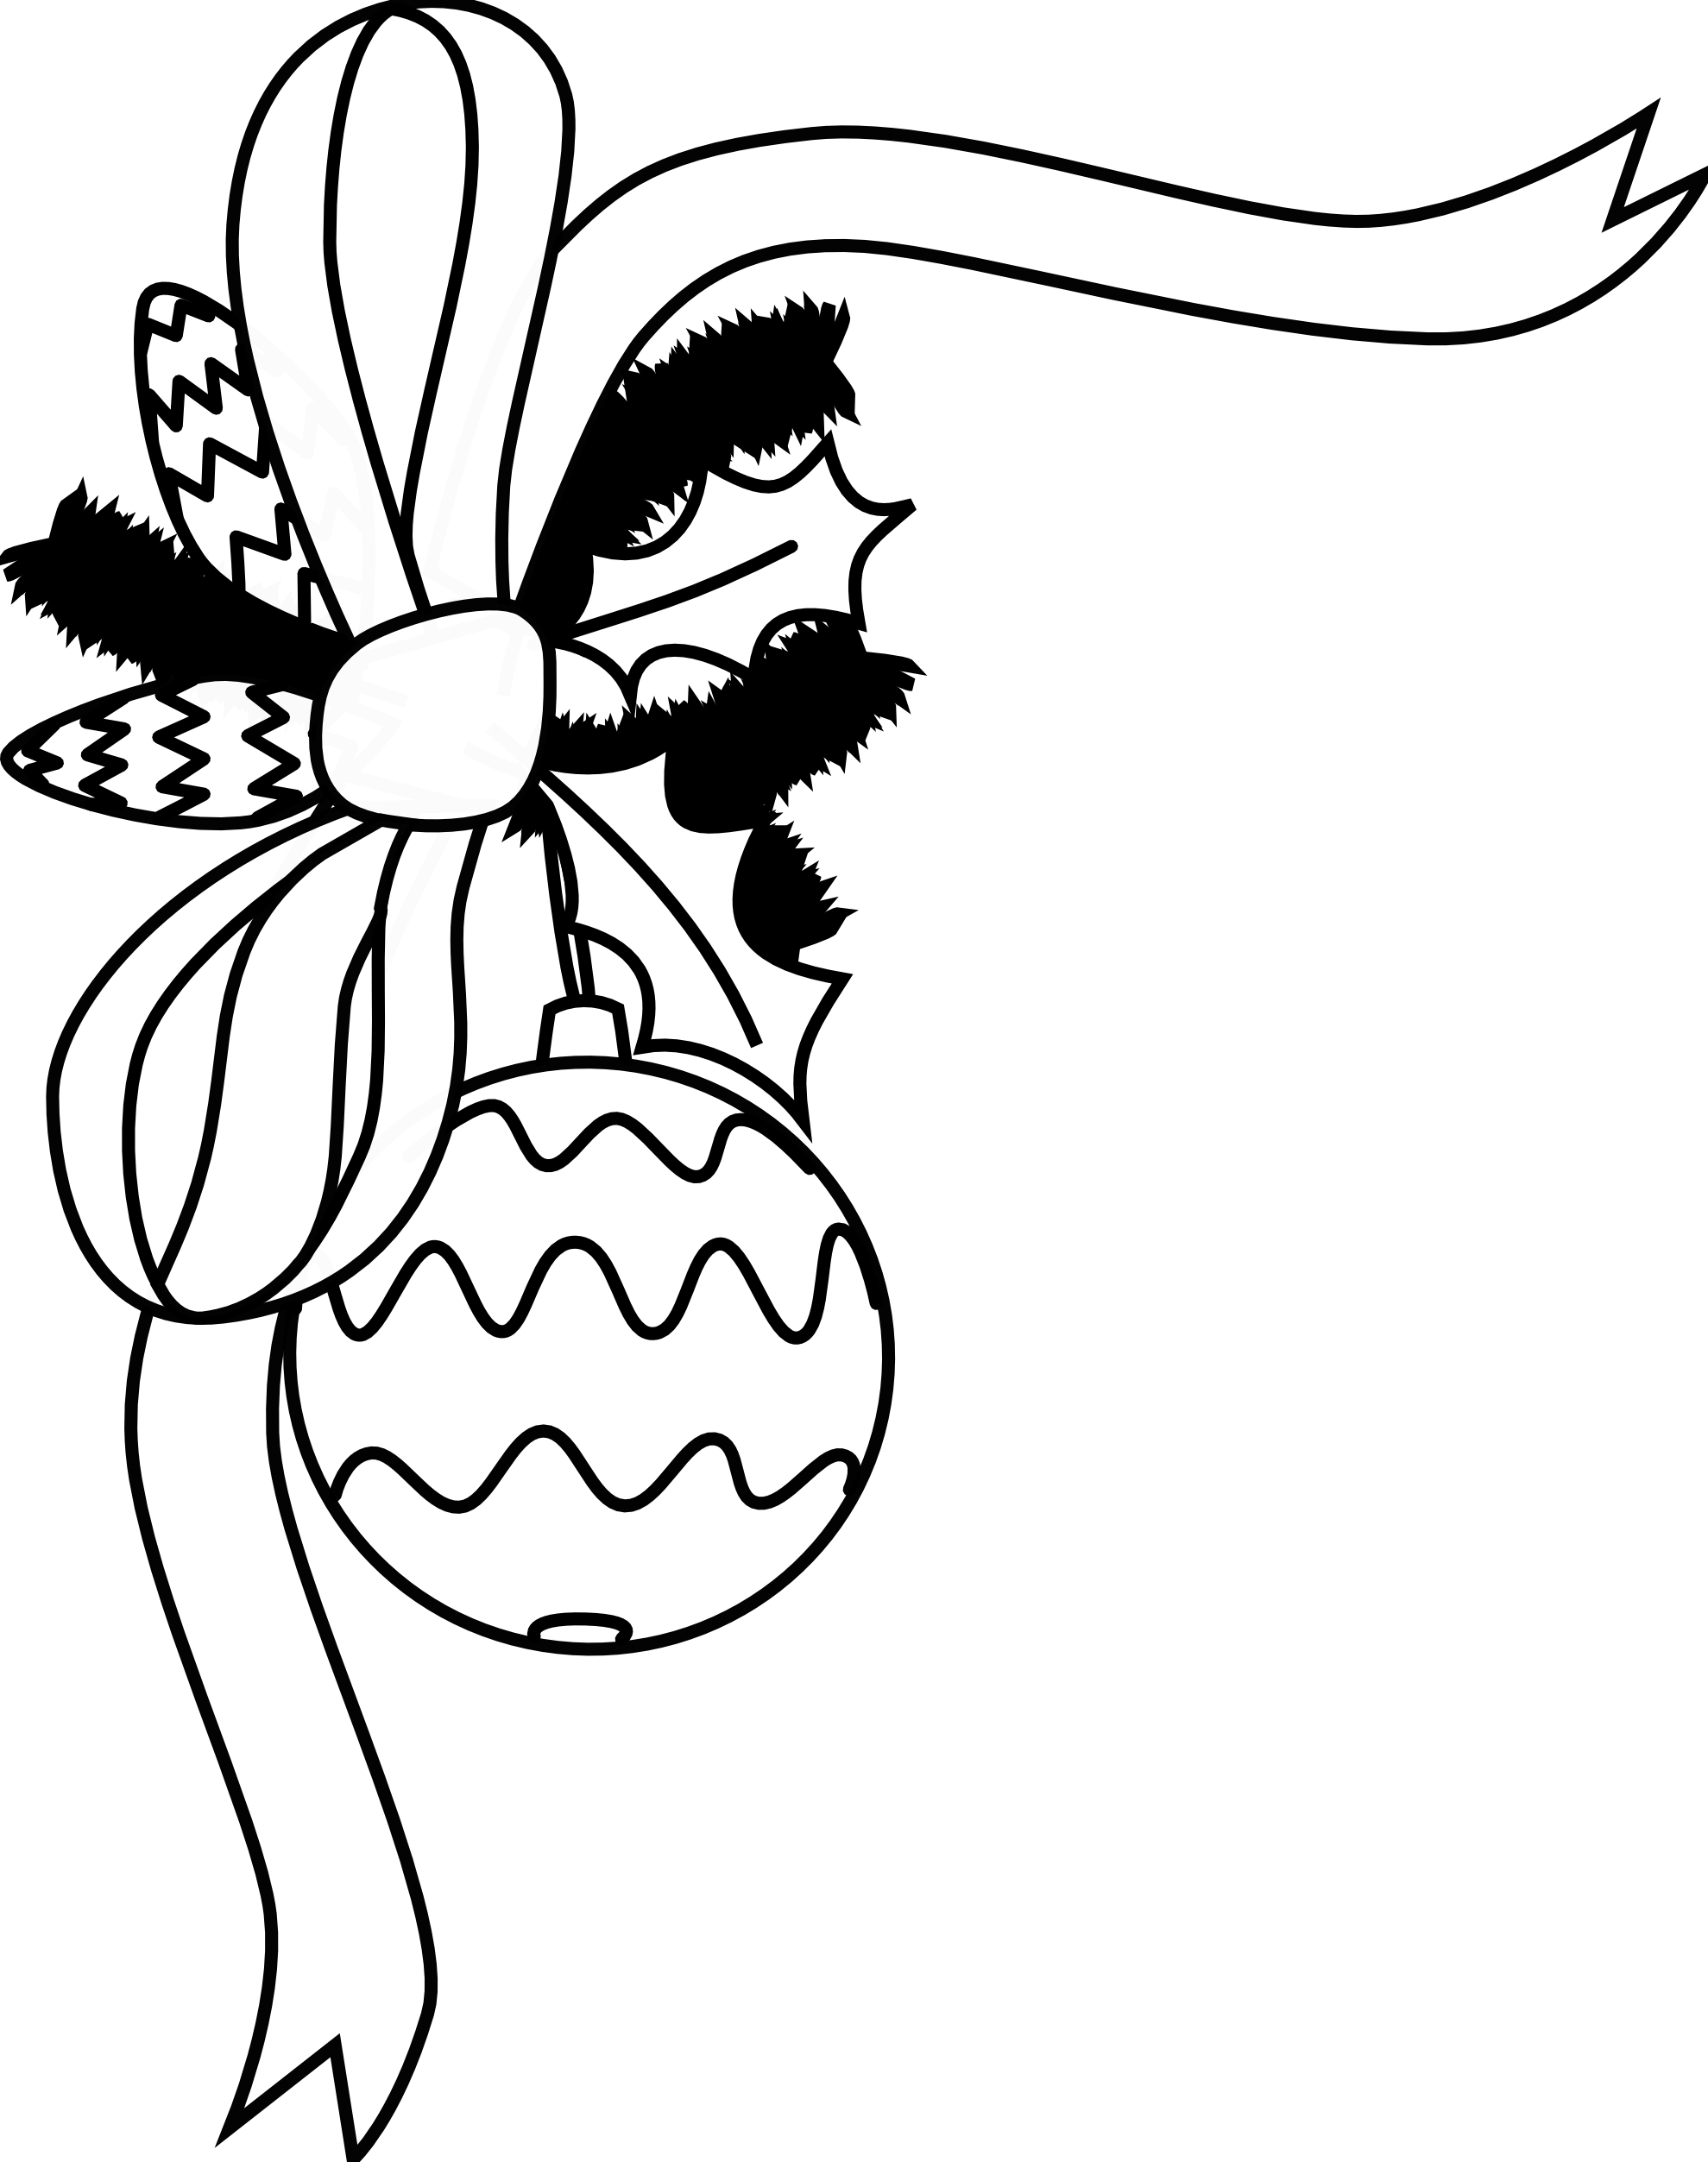 Black And White Holiday Clip Art - Cliparts.co